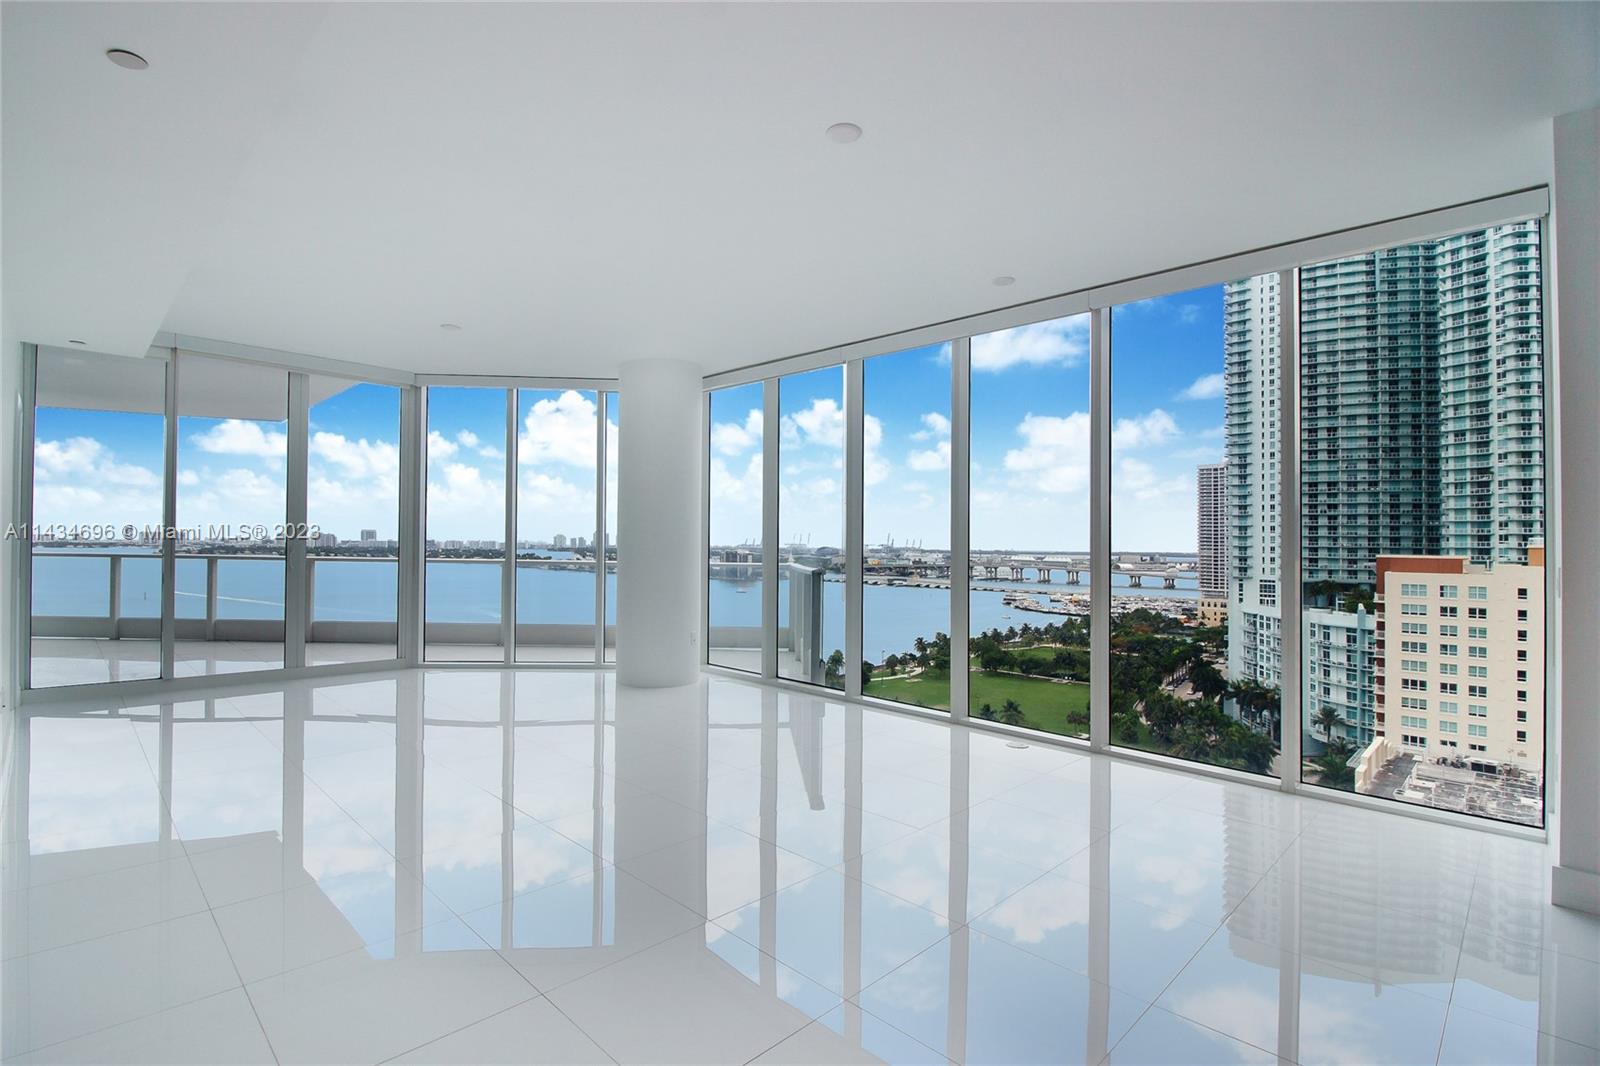 Best line in Paramount Bay. Enjoy magnificent bay views from this truly stunning 3bed/3.5 bath +full den. Spacious 2,201 SF of living space is hard to find in new construction condos! The den can be used as a convertible 4th bed. Water views from all directions, with each bedroom having balcony access. Built out closets and window treatments. Paramount Bay is located on a quiet part of N. Bayshore Dr. with full-service amenities such as two swimming pools, fitness center, concierge, and valet parking. Can also be rented furnished.